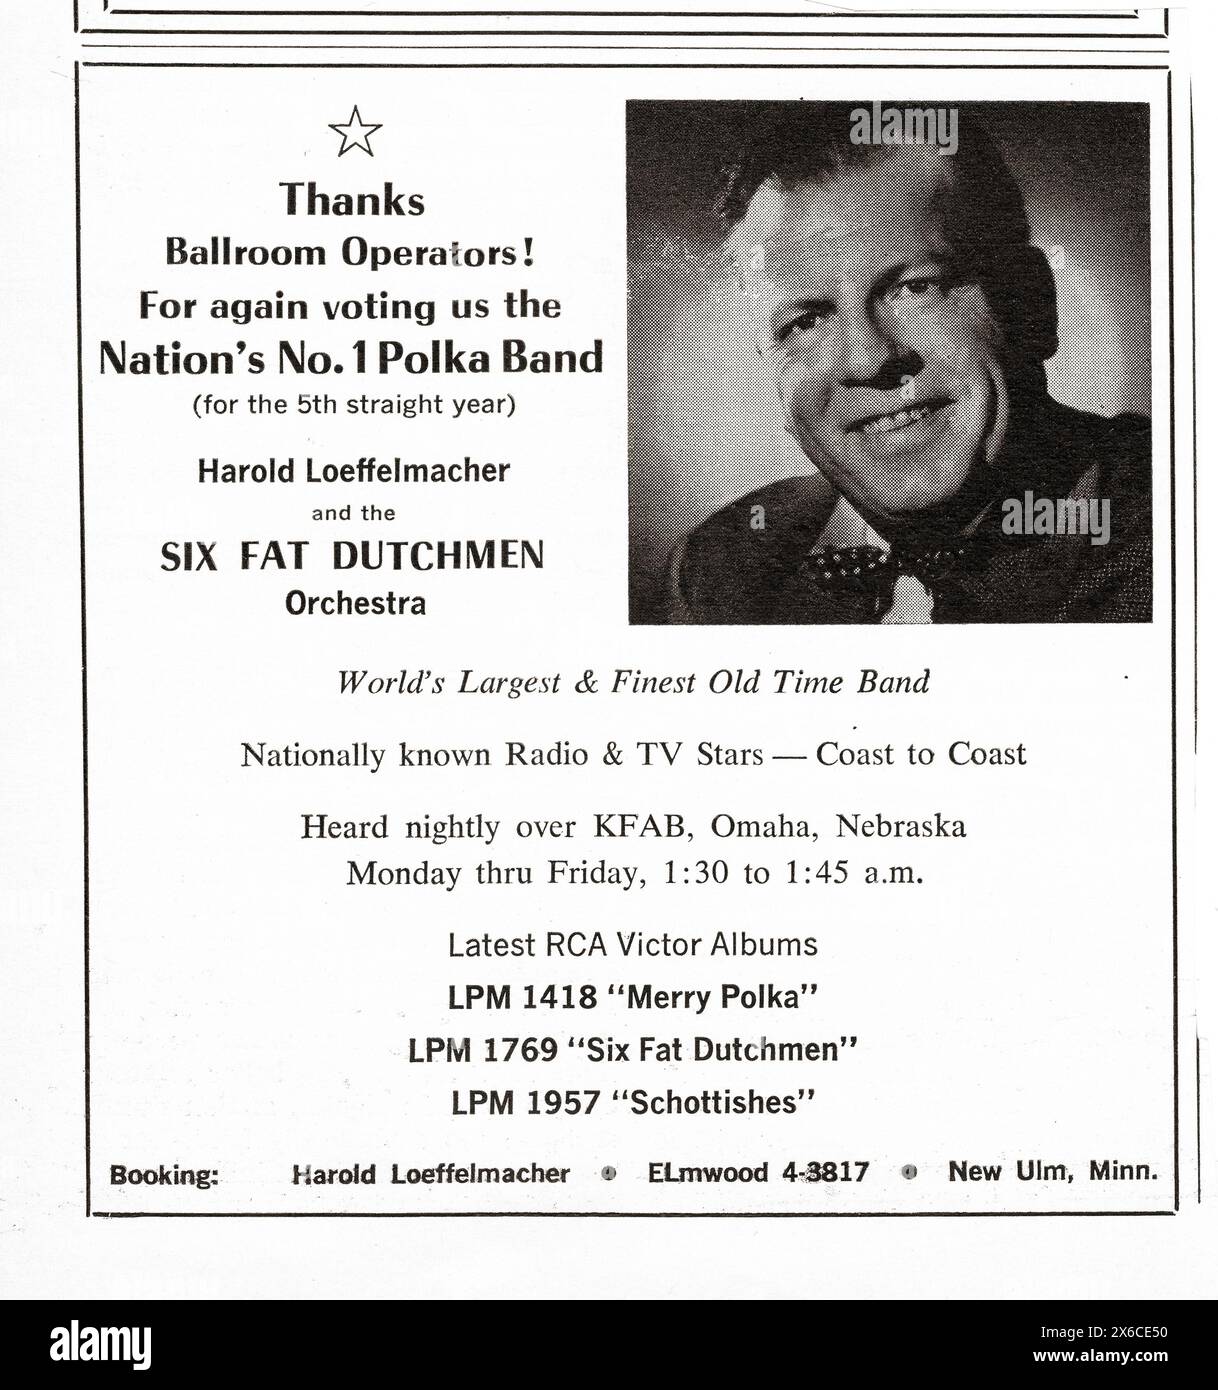 An advertisement aimed at ballroom bookers  in an early 1960s magazine for Harold Loeffelmacher and the Six Fat Dutchmen Orchestra, The nations #1 Polka band (a sentence I've never written before)., Stock Photo